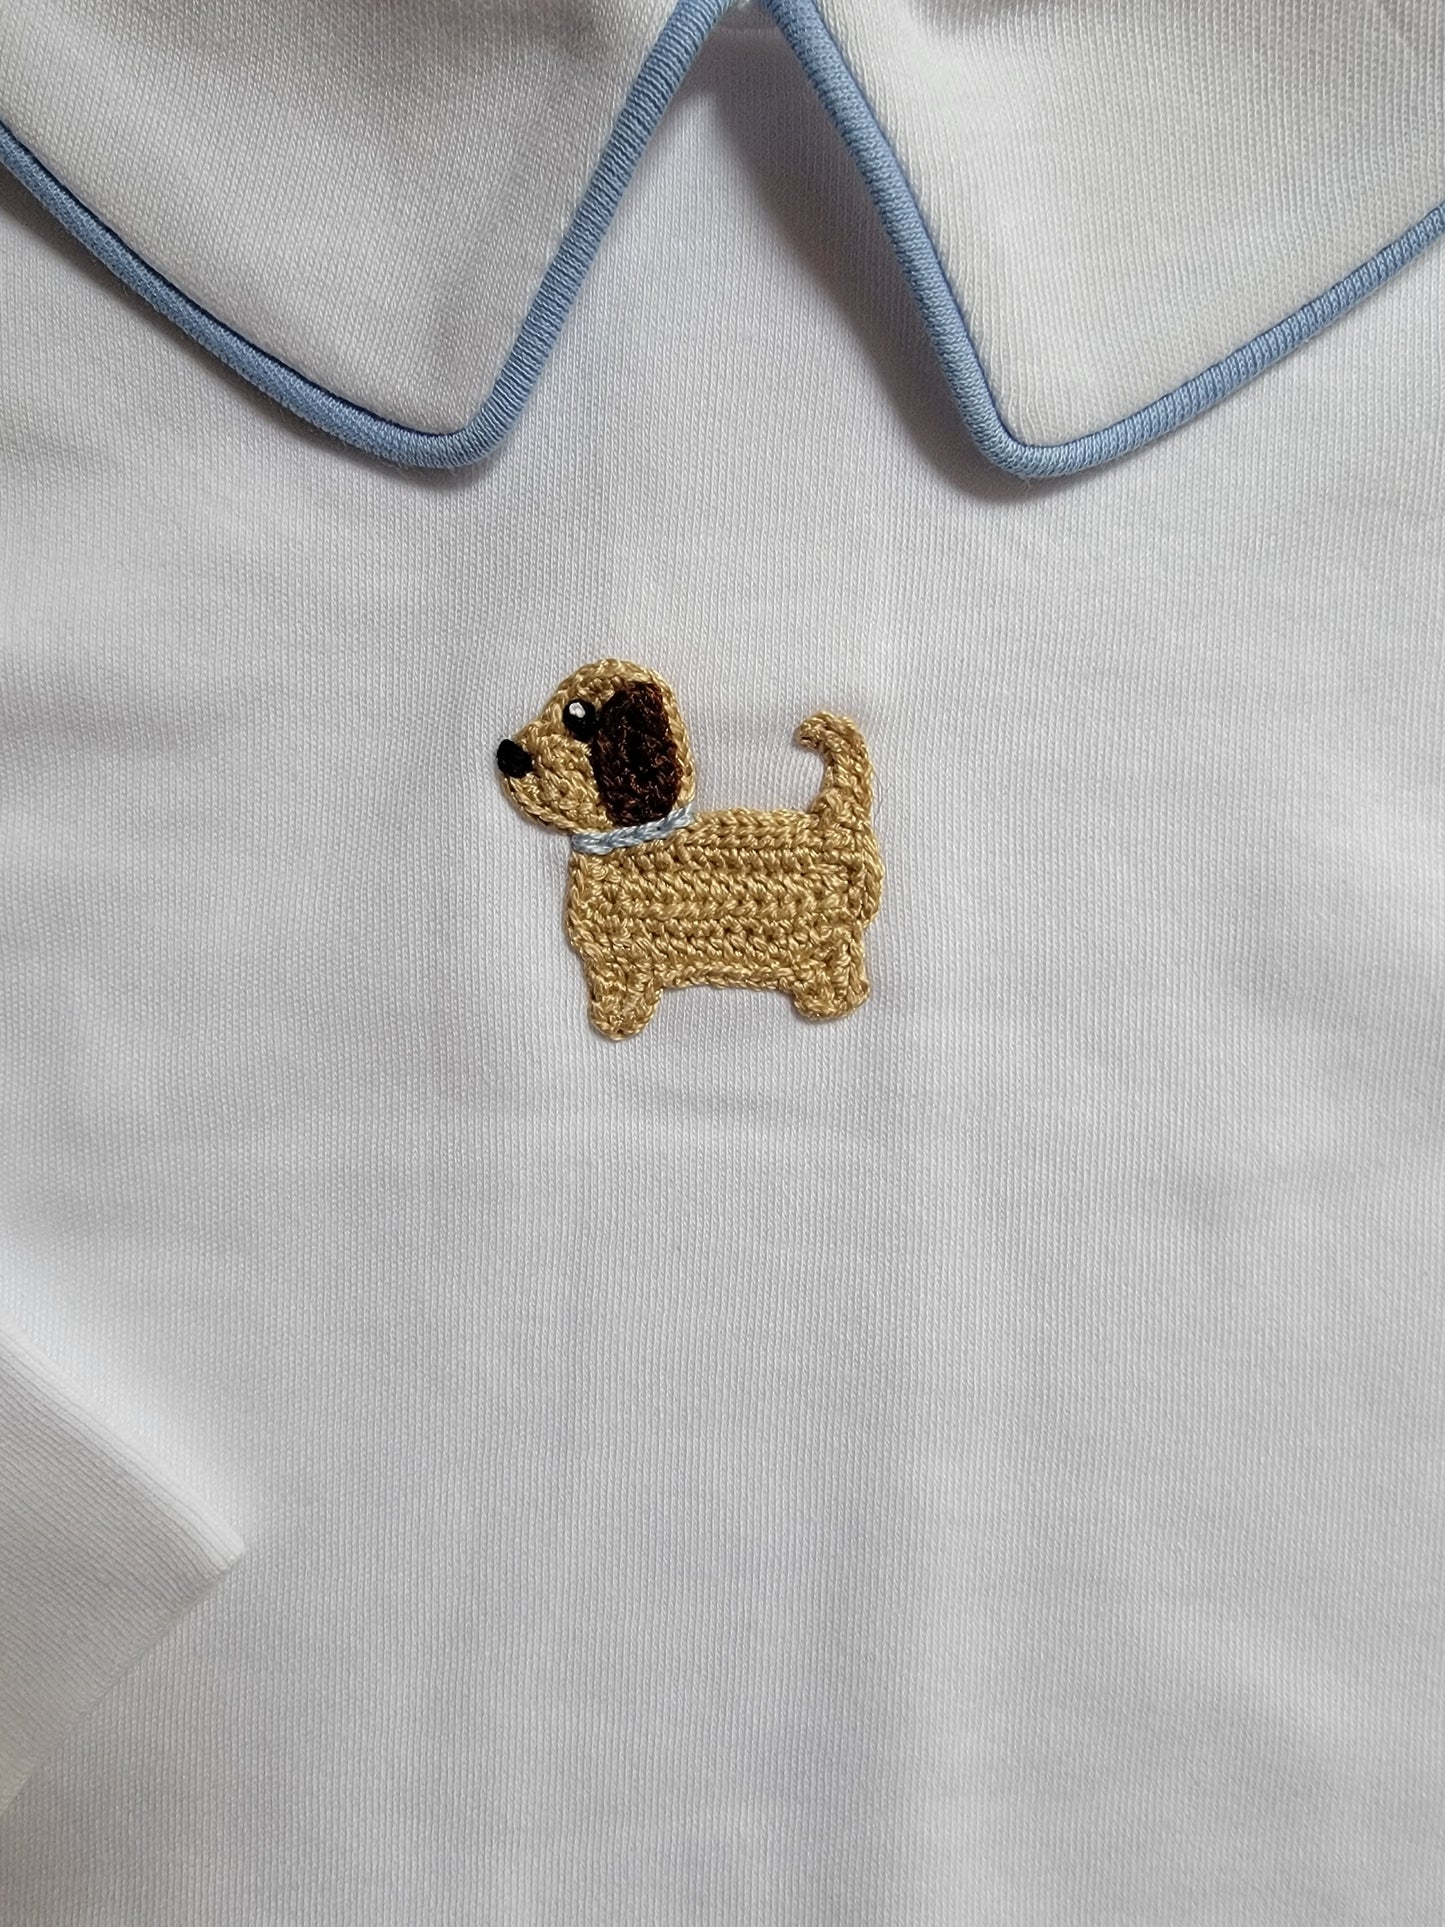 Boy's Long Sleeve Collared Shirt with Crochet Puppy